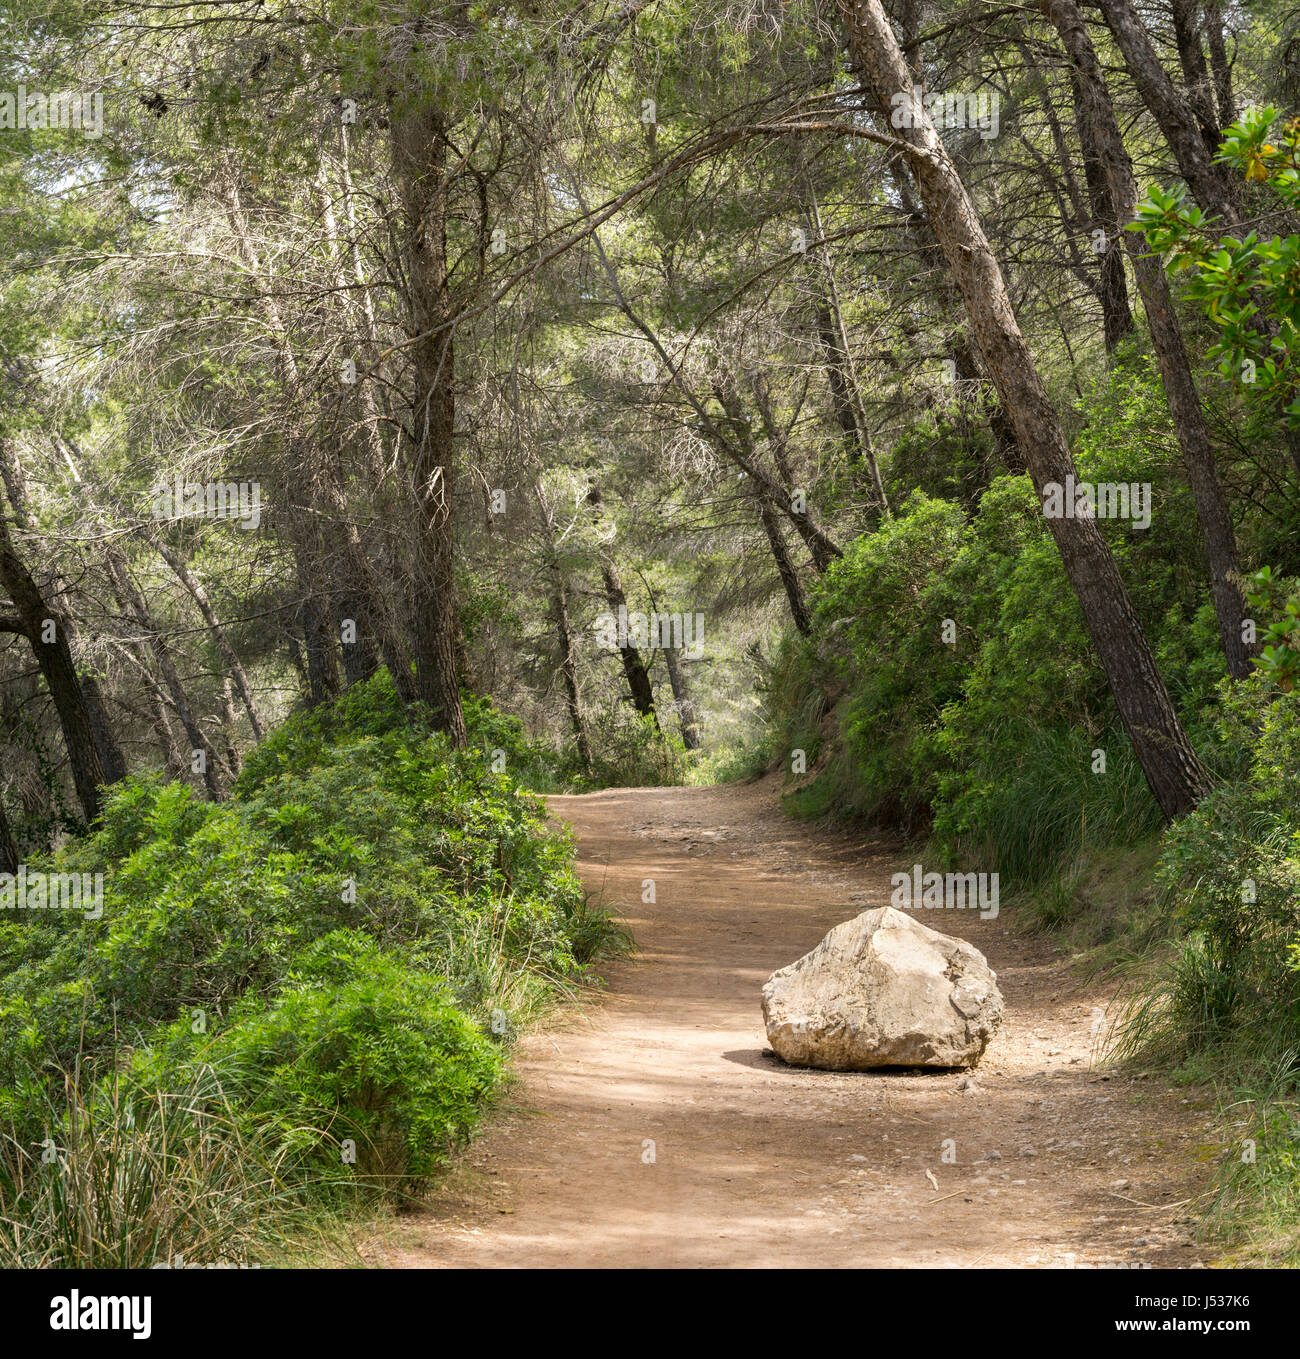 Road or trail blocked by big rock. Overcome an obstacle. Stock Photo